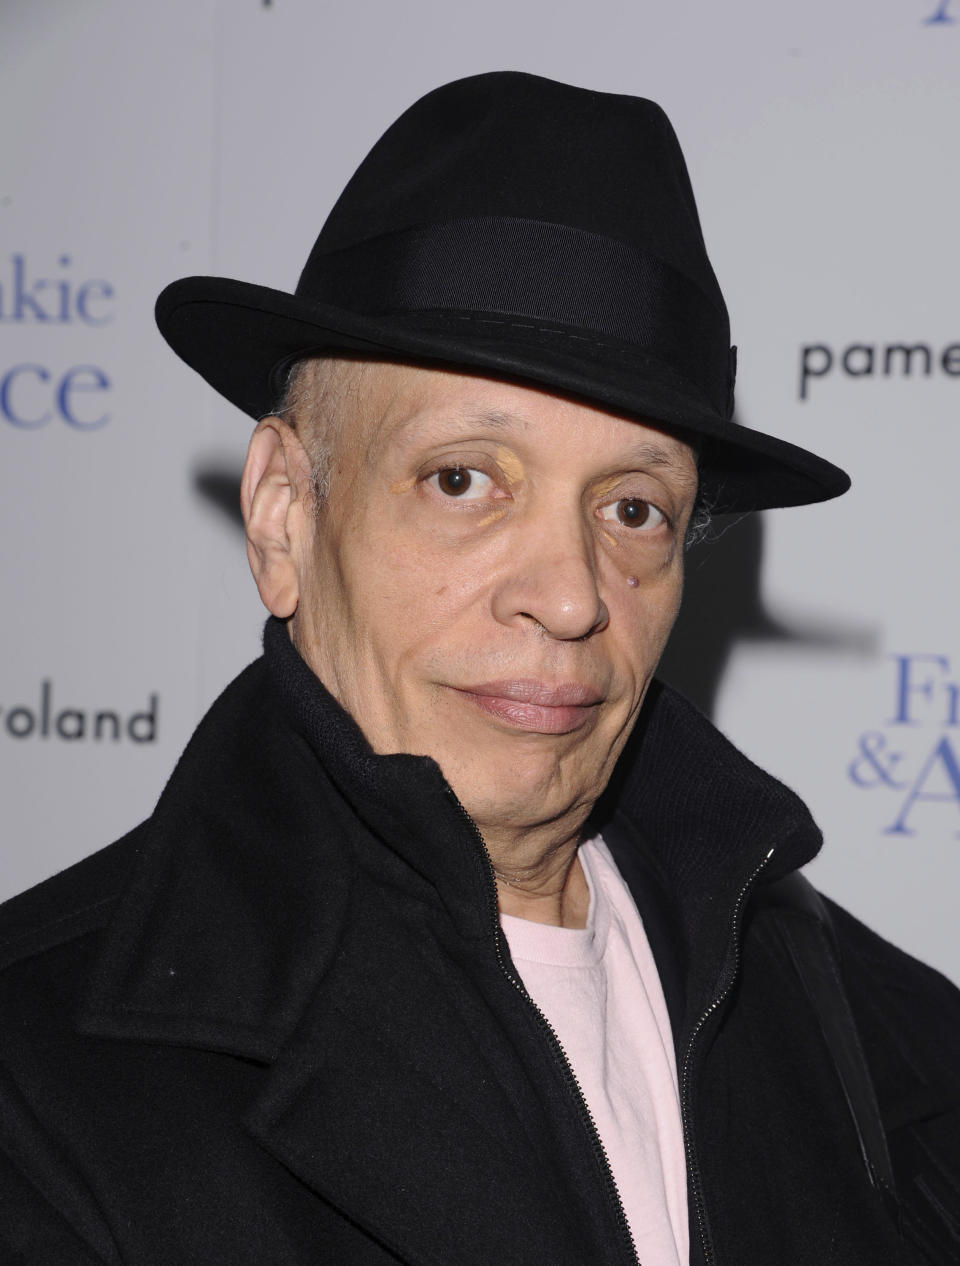 FILE - In this Nov. 17, 2010 file photo, author Walter Mosley attends a special screening of "Frankie & Alice" in New York. Mosley is known for his “Easy Rawlins” novels about a black detective in Los Angeles. (AP Photo/Peter Kramer, File)